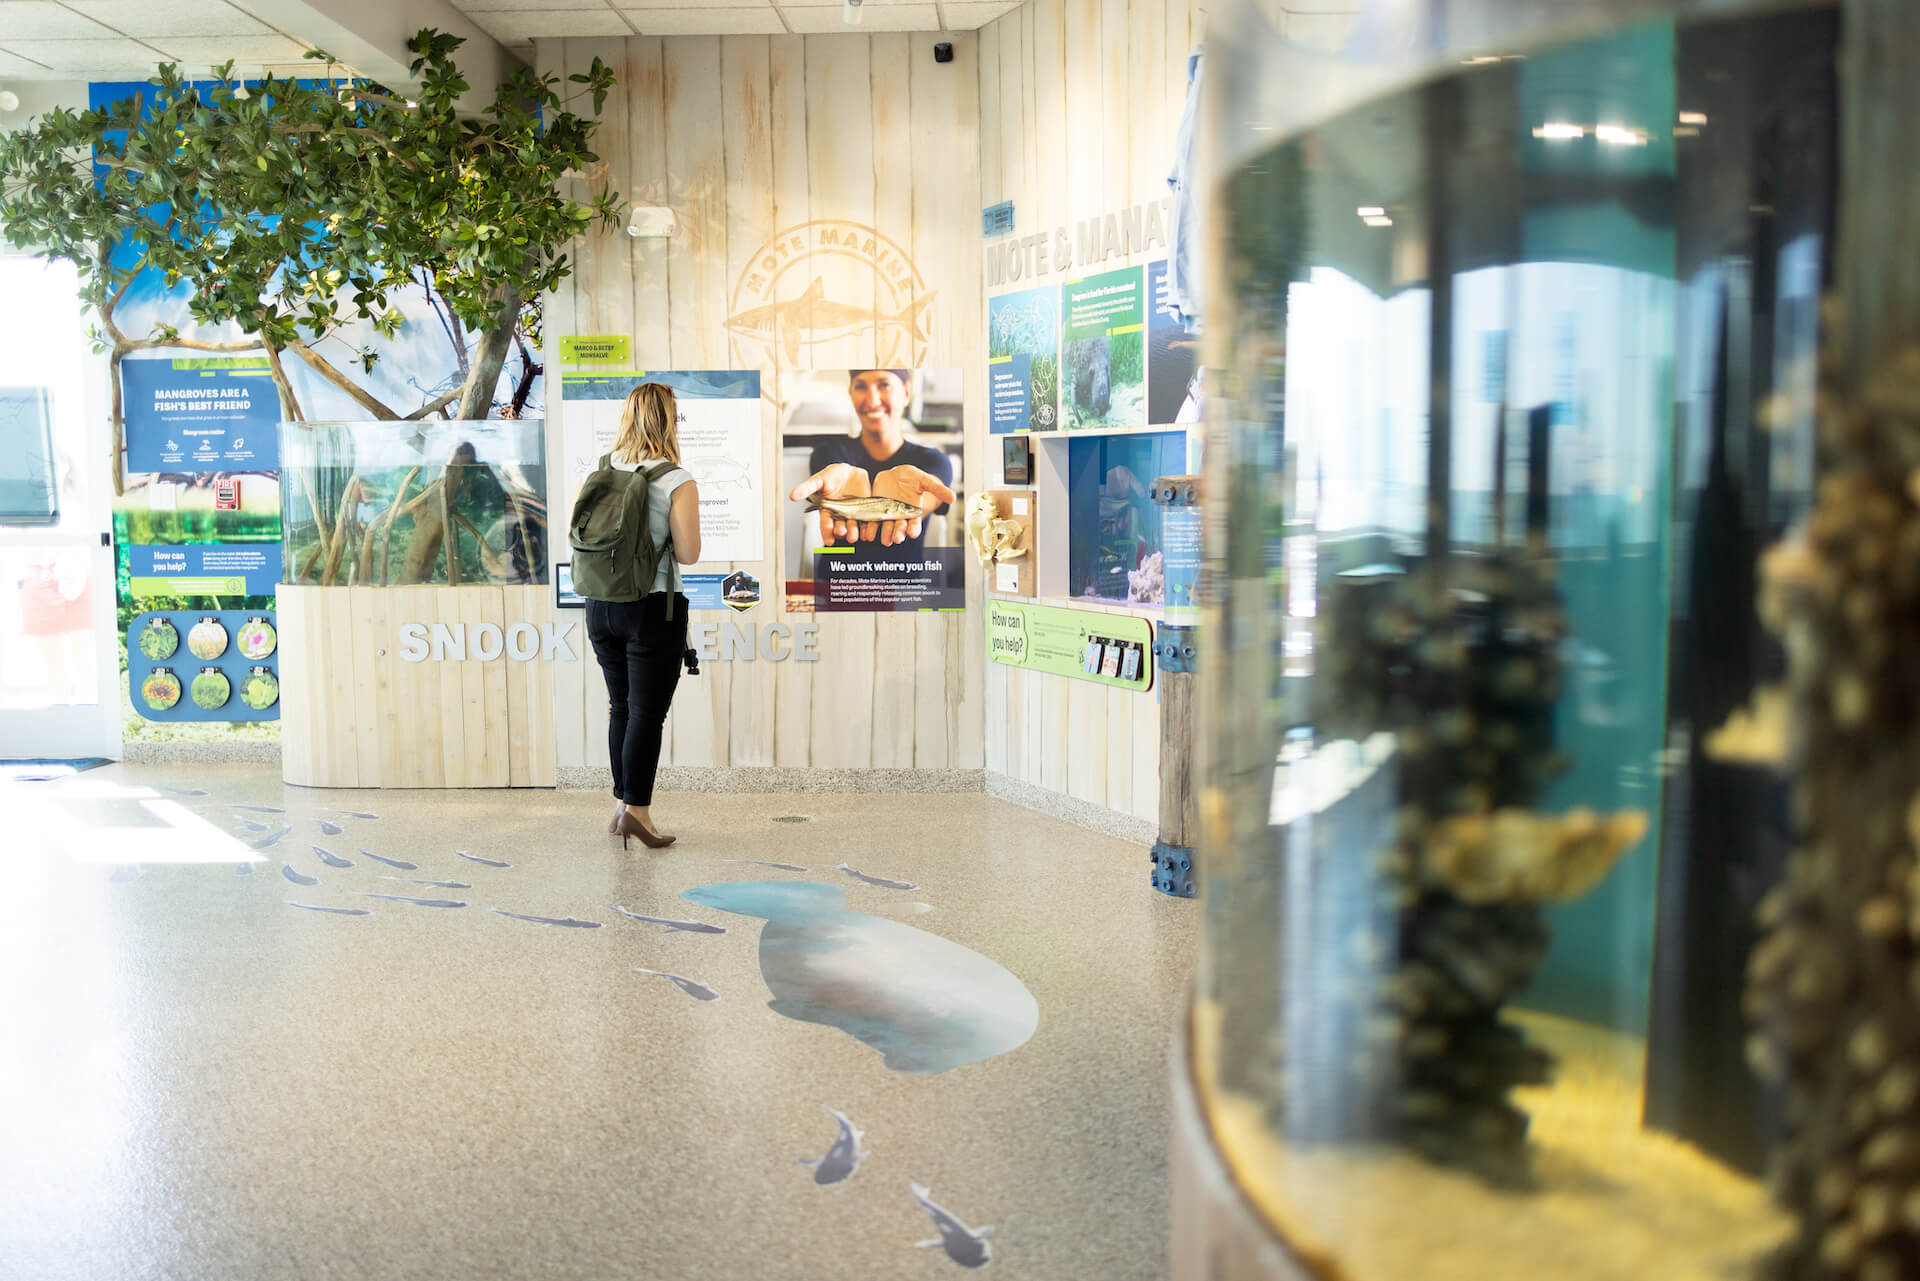 A visitor looks at exhibits featuring snook science at Mote's Marine Science Education & Outreach Center on Anna Maria City Pier